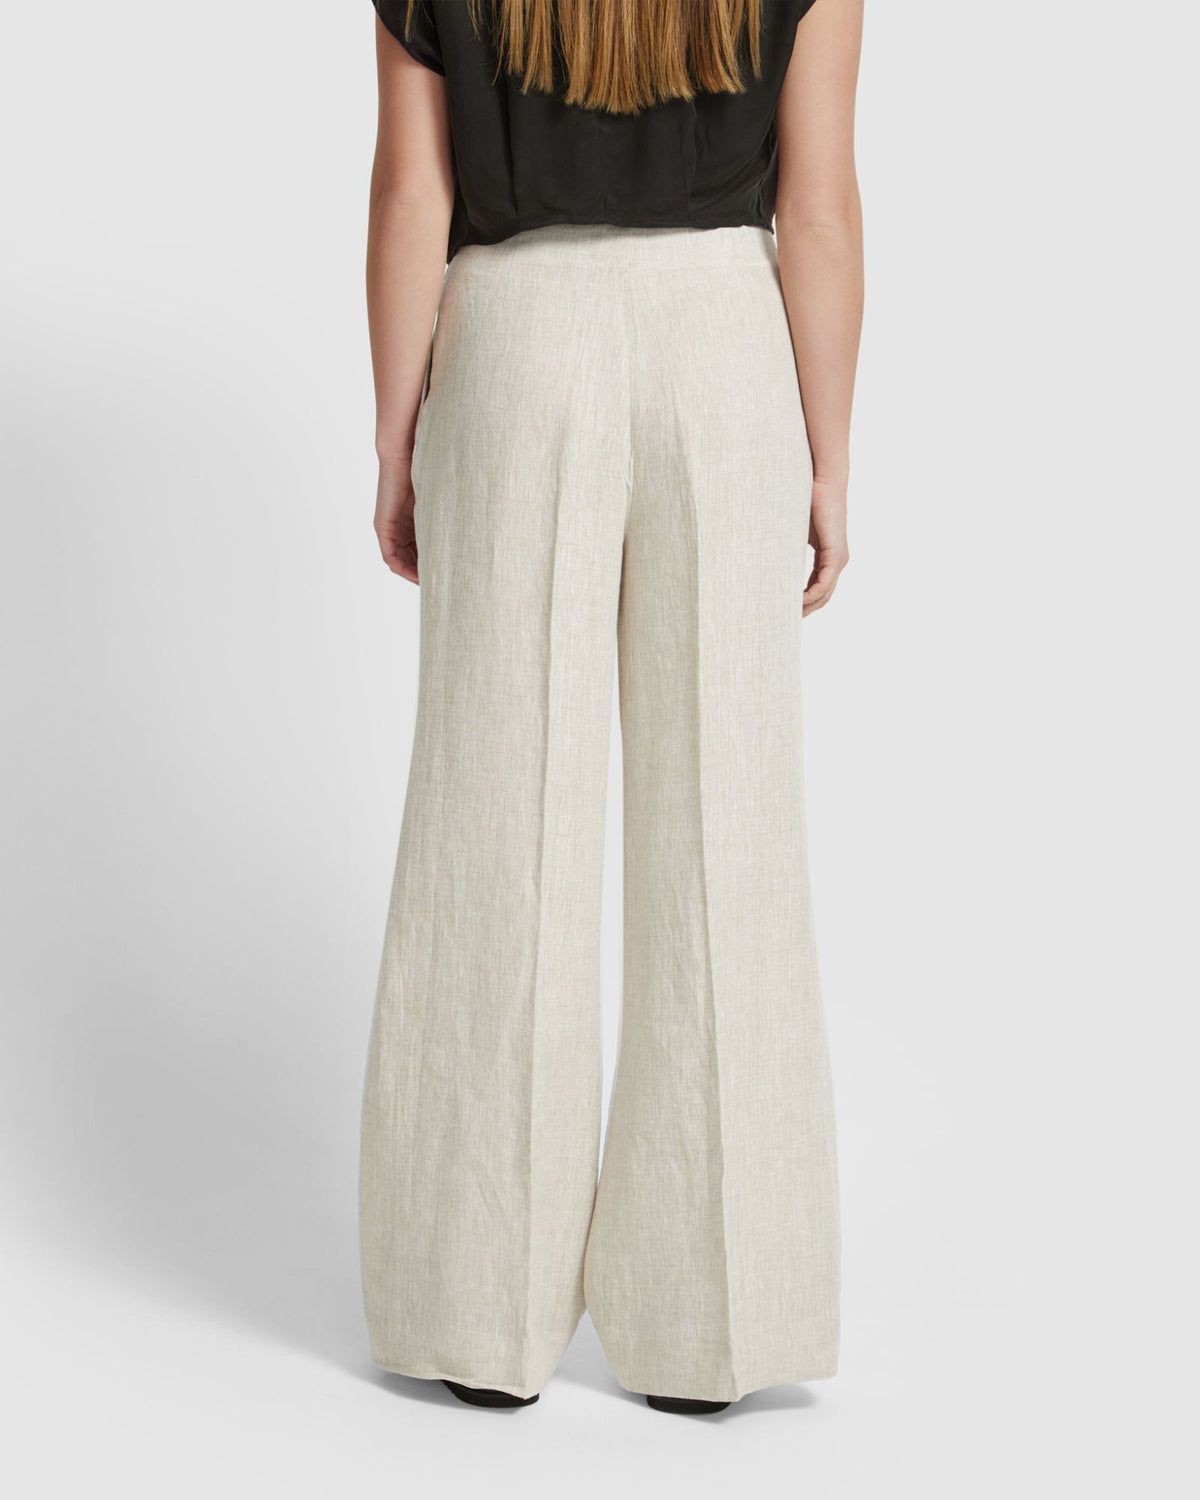 White Linen Blouse with Beige Wide Leg Trousers